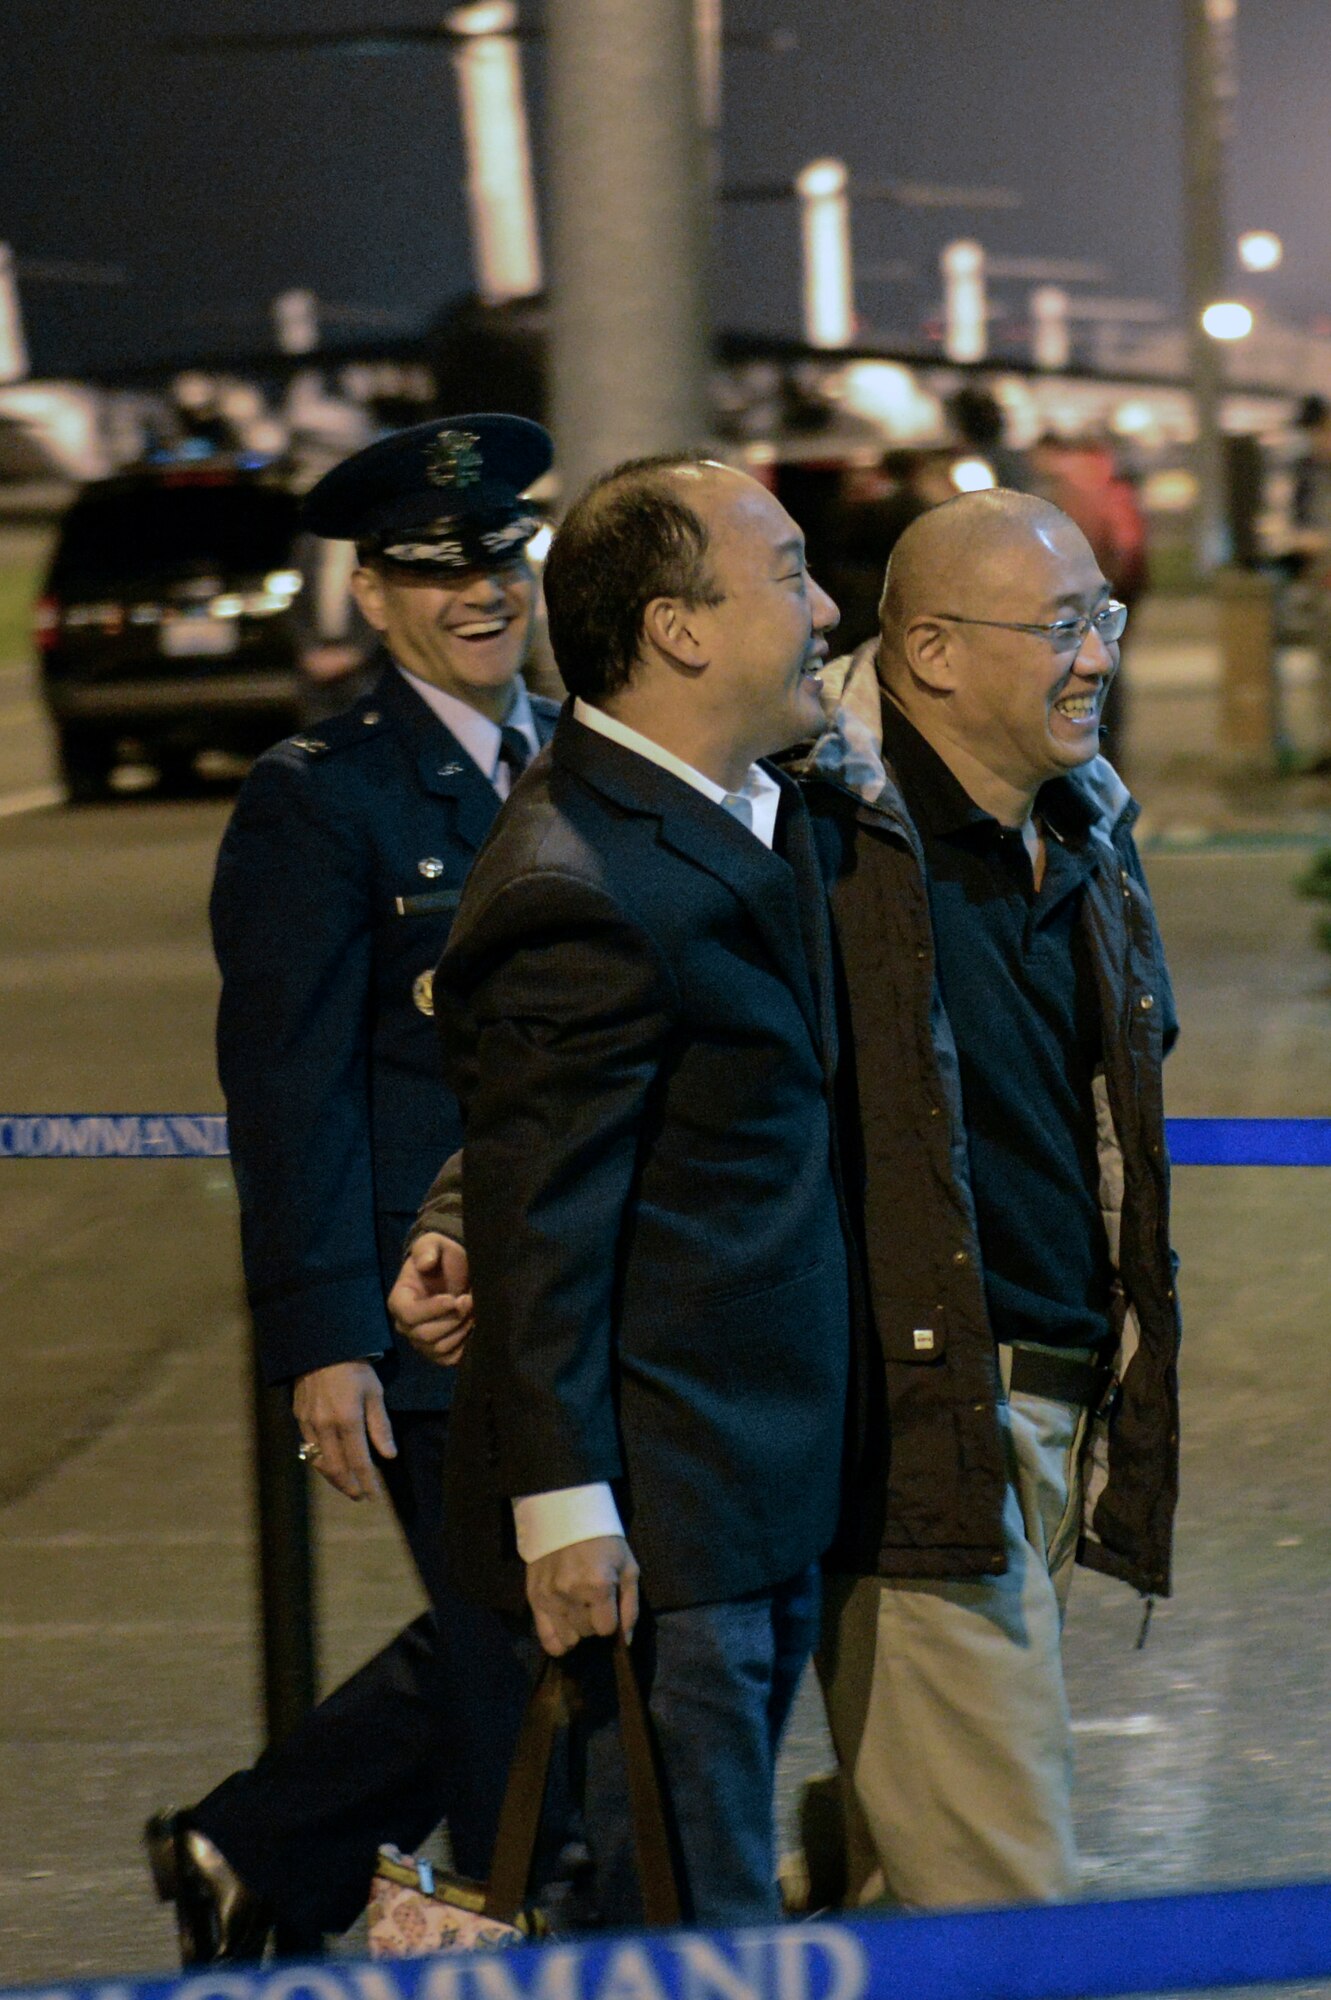 Kenneth Bae (right), one of the last two American citizens imprisoned in North Korea, is escorted by Col David Kumashiro (left), 62nd Airlift Wing commander, into the McChord Field Passenger Terminal Nov. 8th, 2014, at Joint Base Lewis-McChord, Wash., after spending more than two years in a North Korean prison. In November of 2012, Bae led a group of tourists into North Korea where he was arrested and accused of trying to overthrow the government and was sentenced to 15 years of hard labor. (U.S. Air Force photo/Staff Sgt. Russ Jackson)